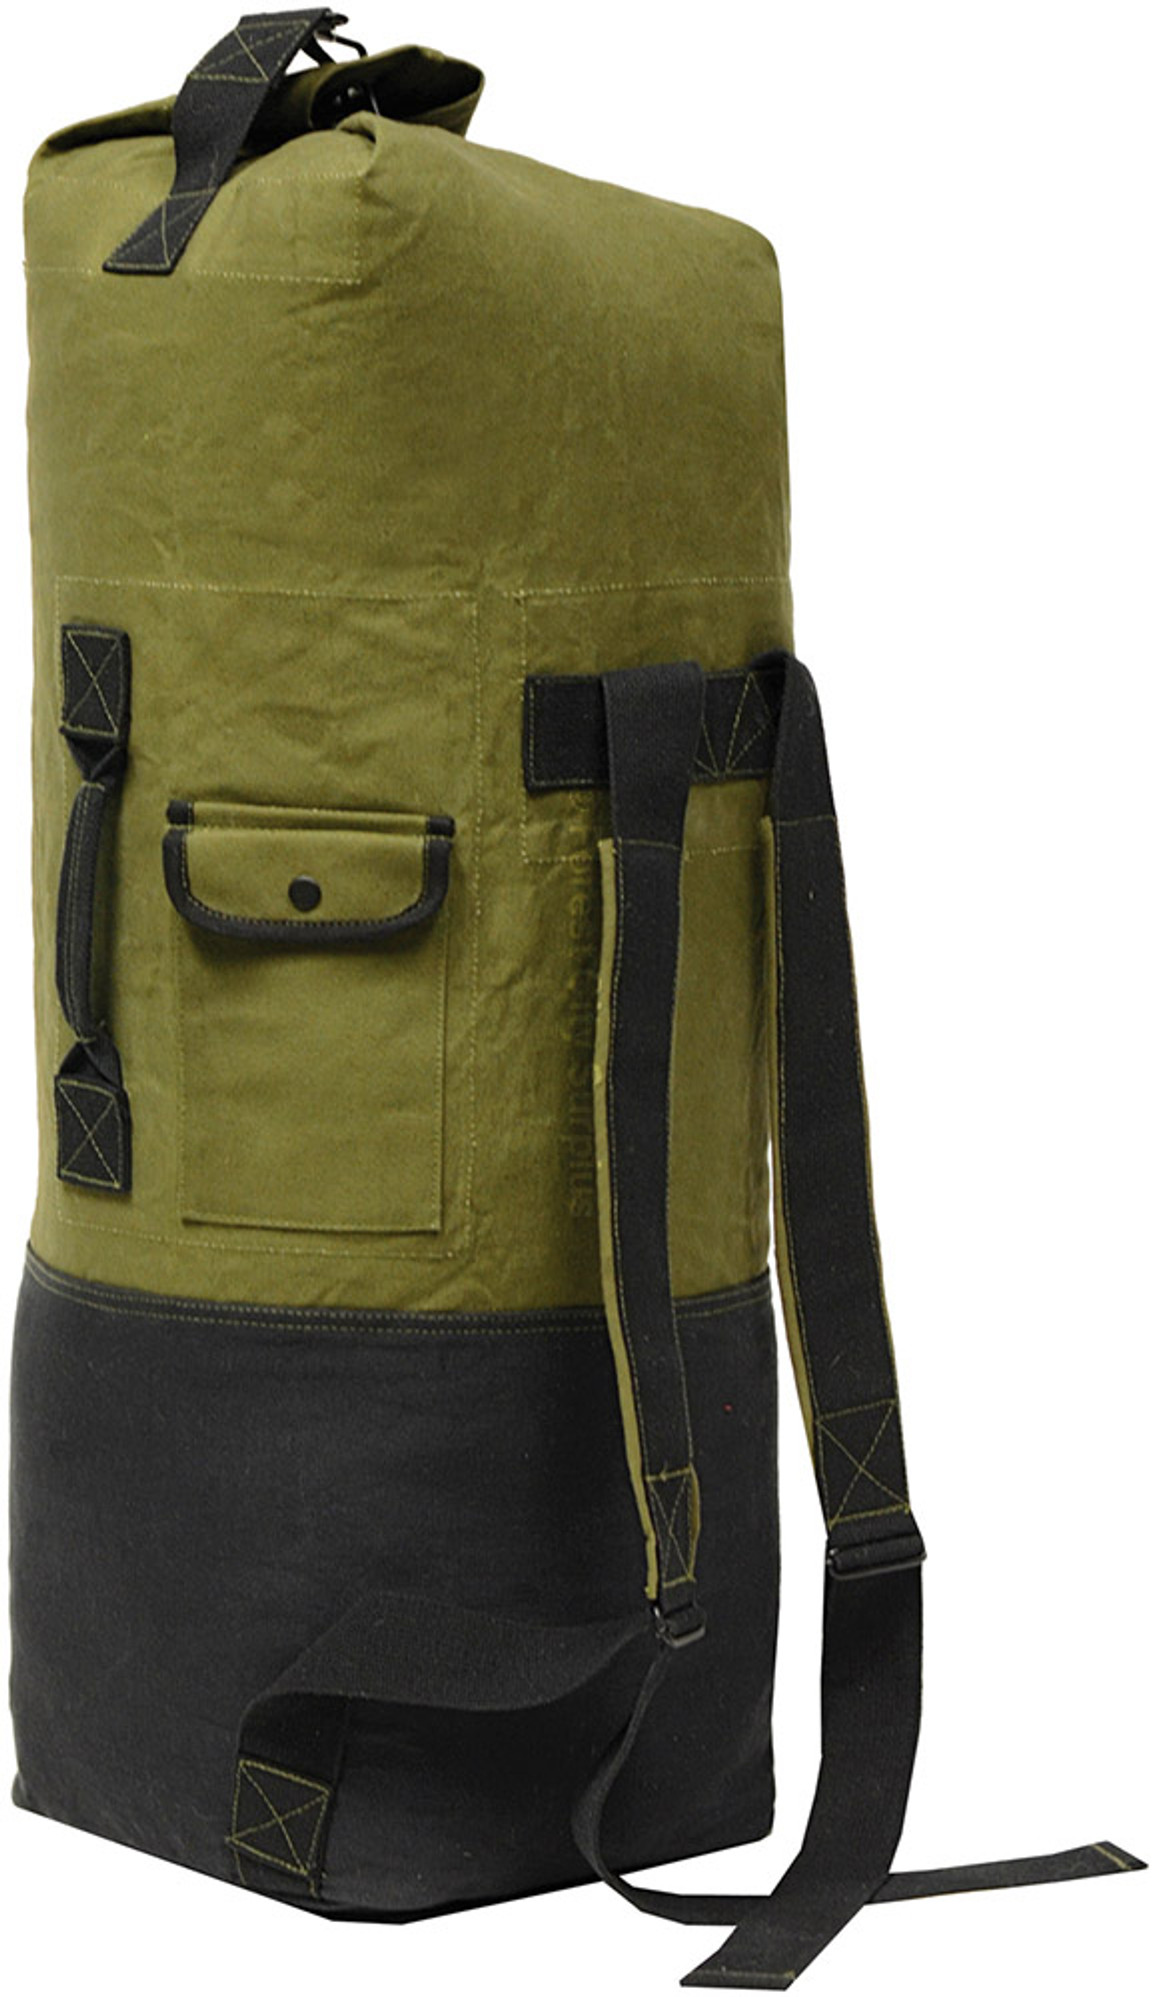 World Famous 22 "X 38" Waxed Canvas Army Style Duffle Bag - Olive/Black